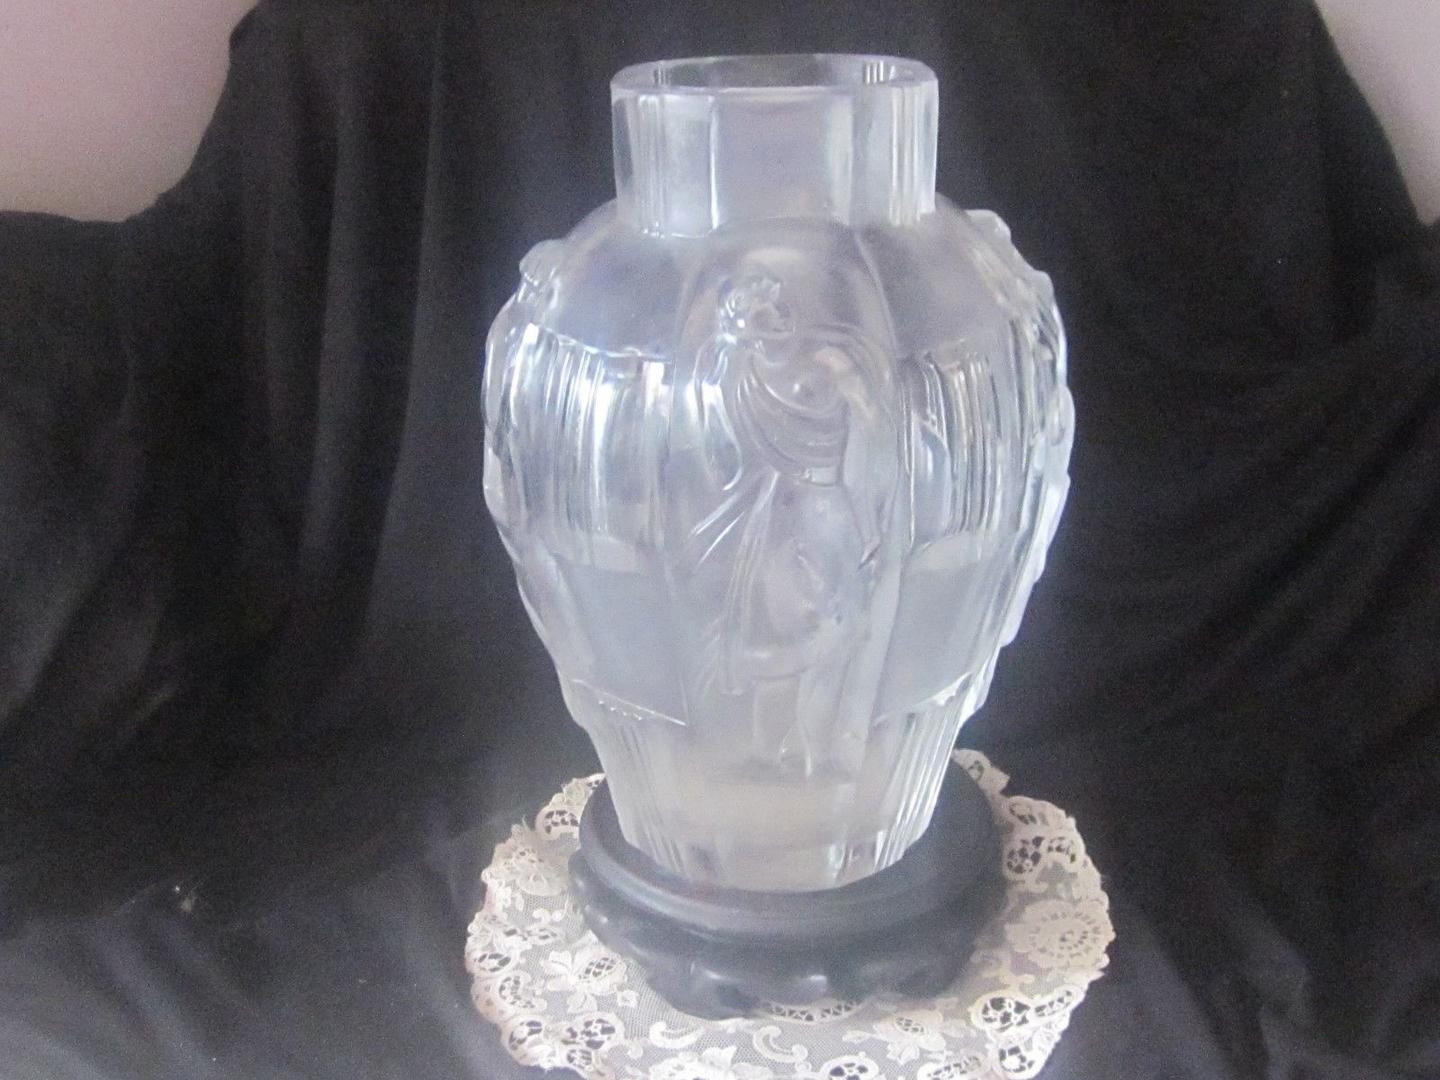 16 Popular Lalique Vases On Ebay 2024 free download lalique vases on ebay of vintage lalique greek goddess vase with stand super nice 1860179287 inside previous